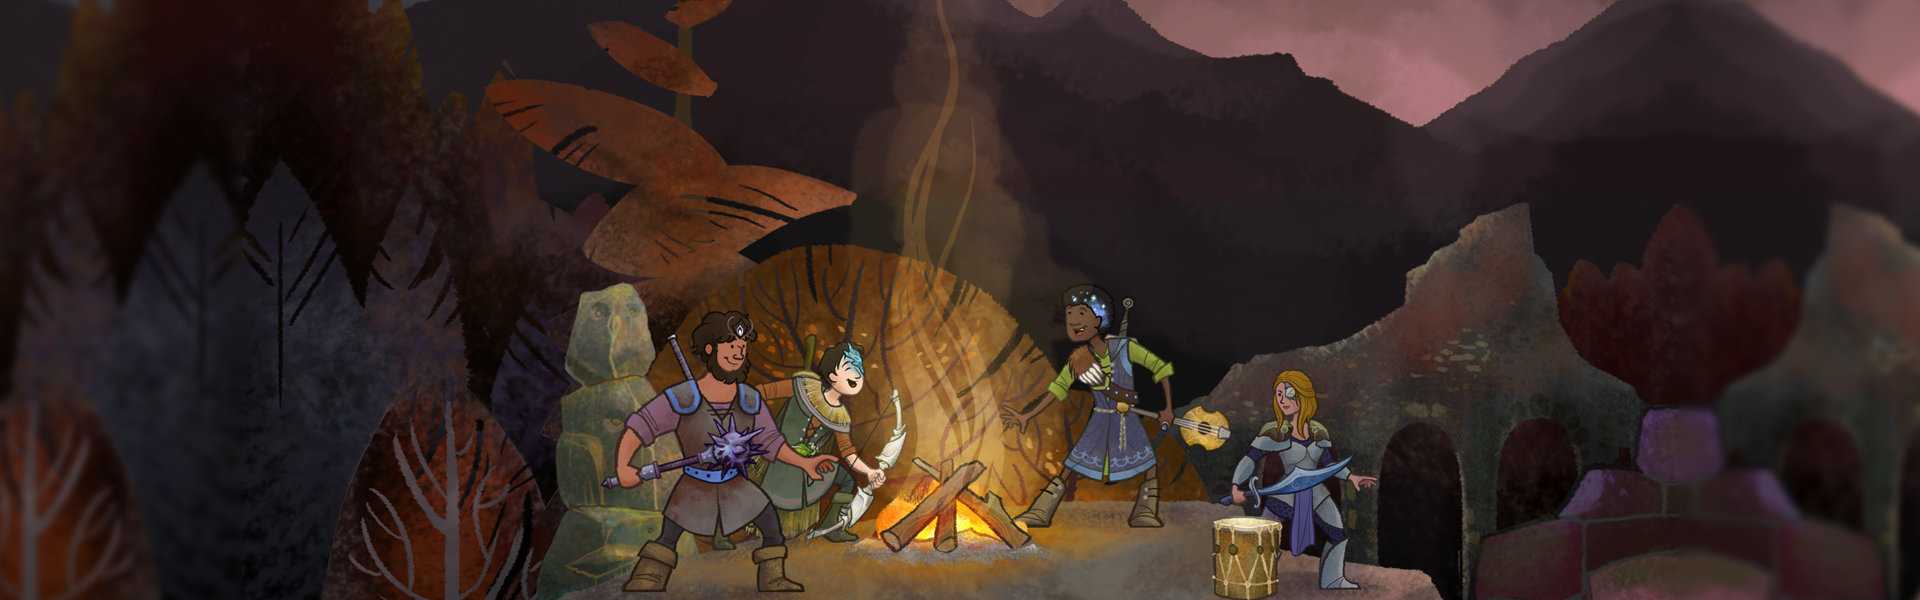 A scenic screenshot from Wildermyth of a party of adventurers happily singing around a campfire.